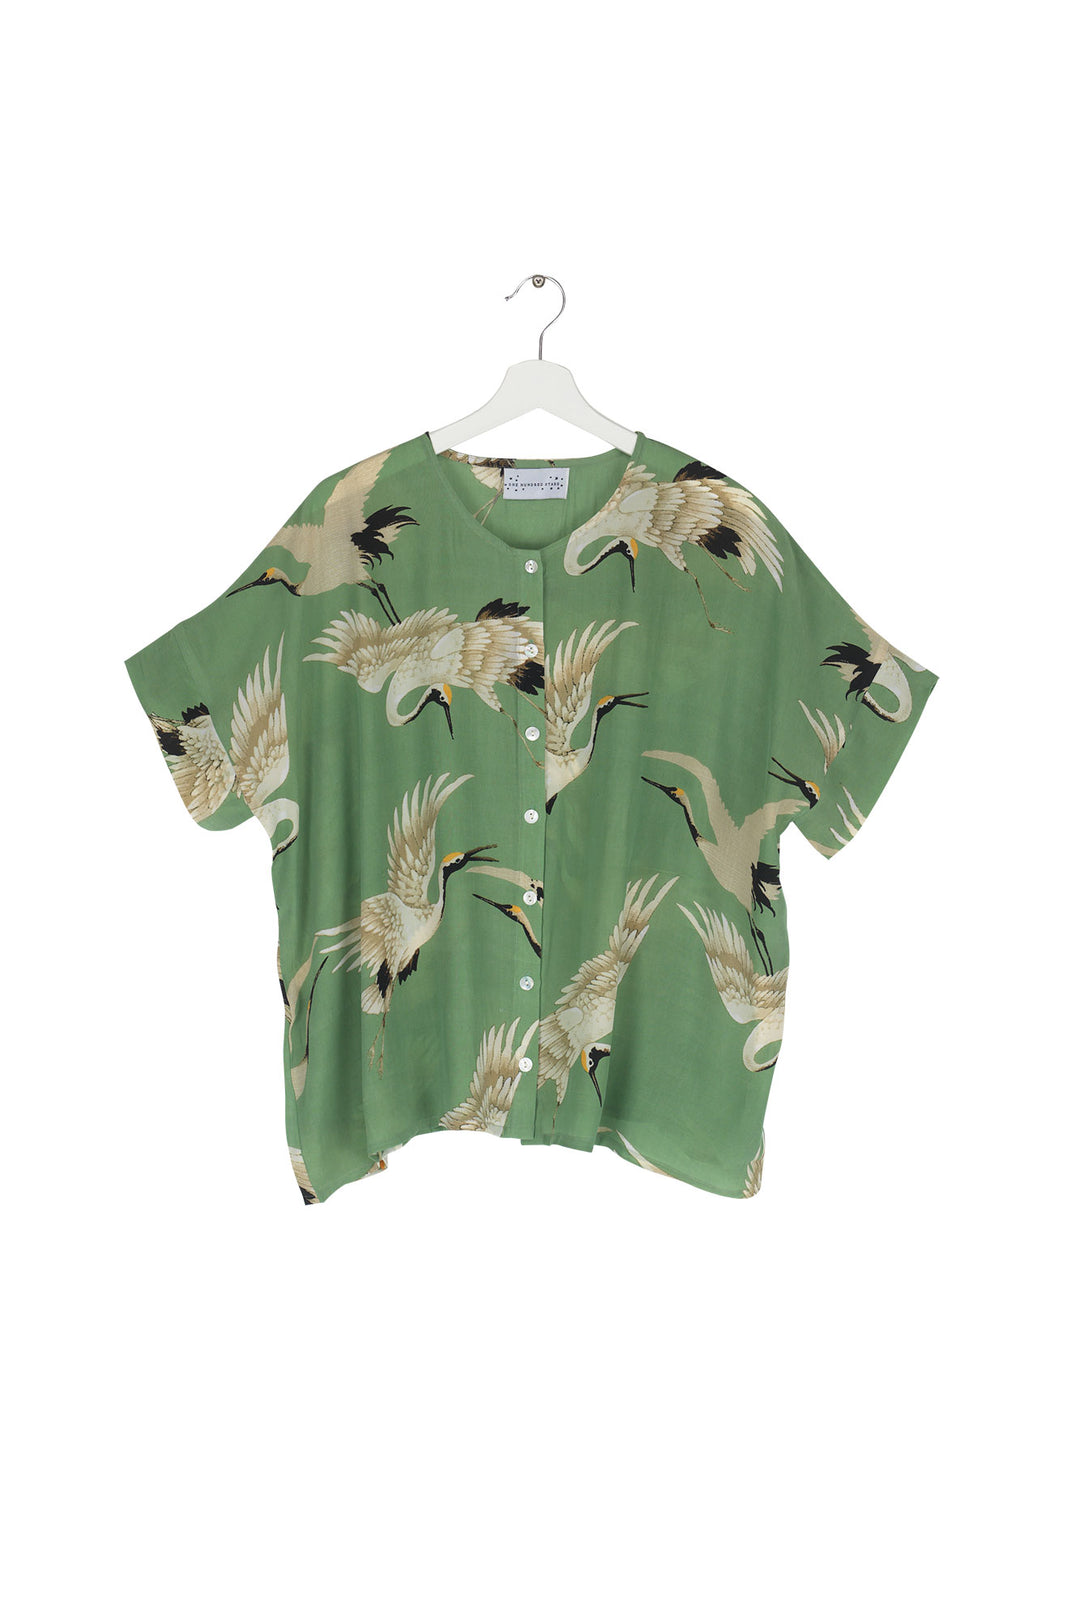 Women's short sleeve button up blouse in pea green and white stork print by One Hundred Stars